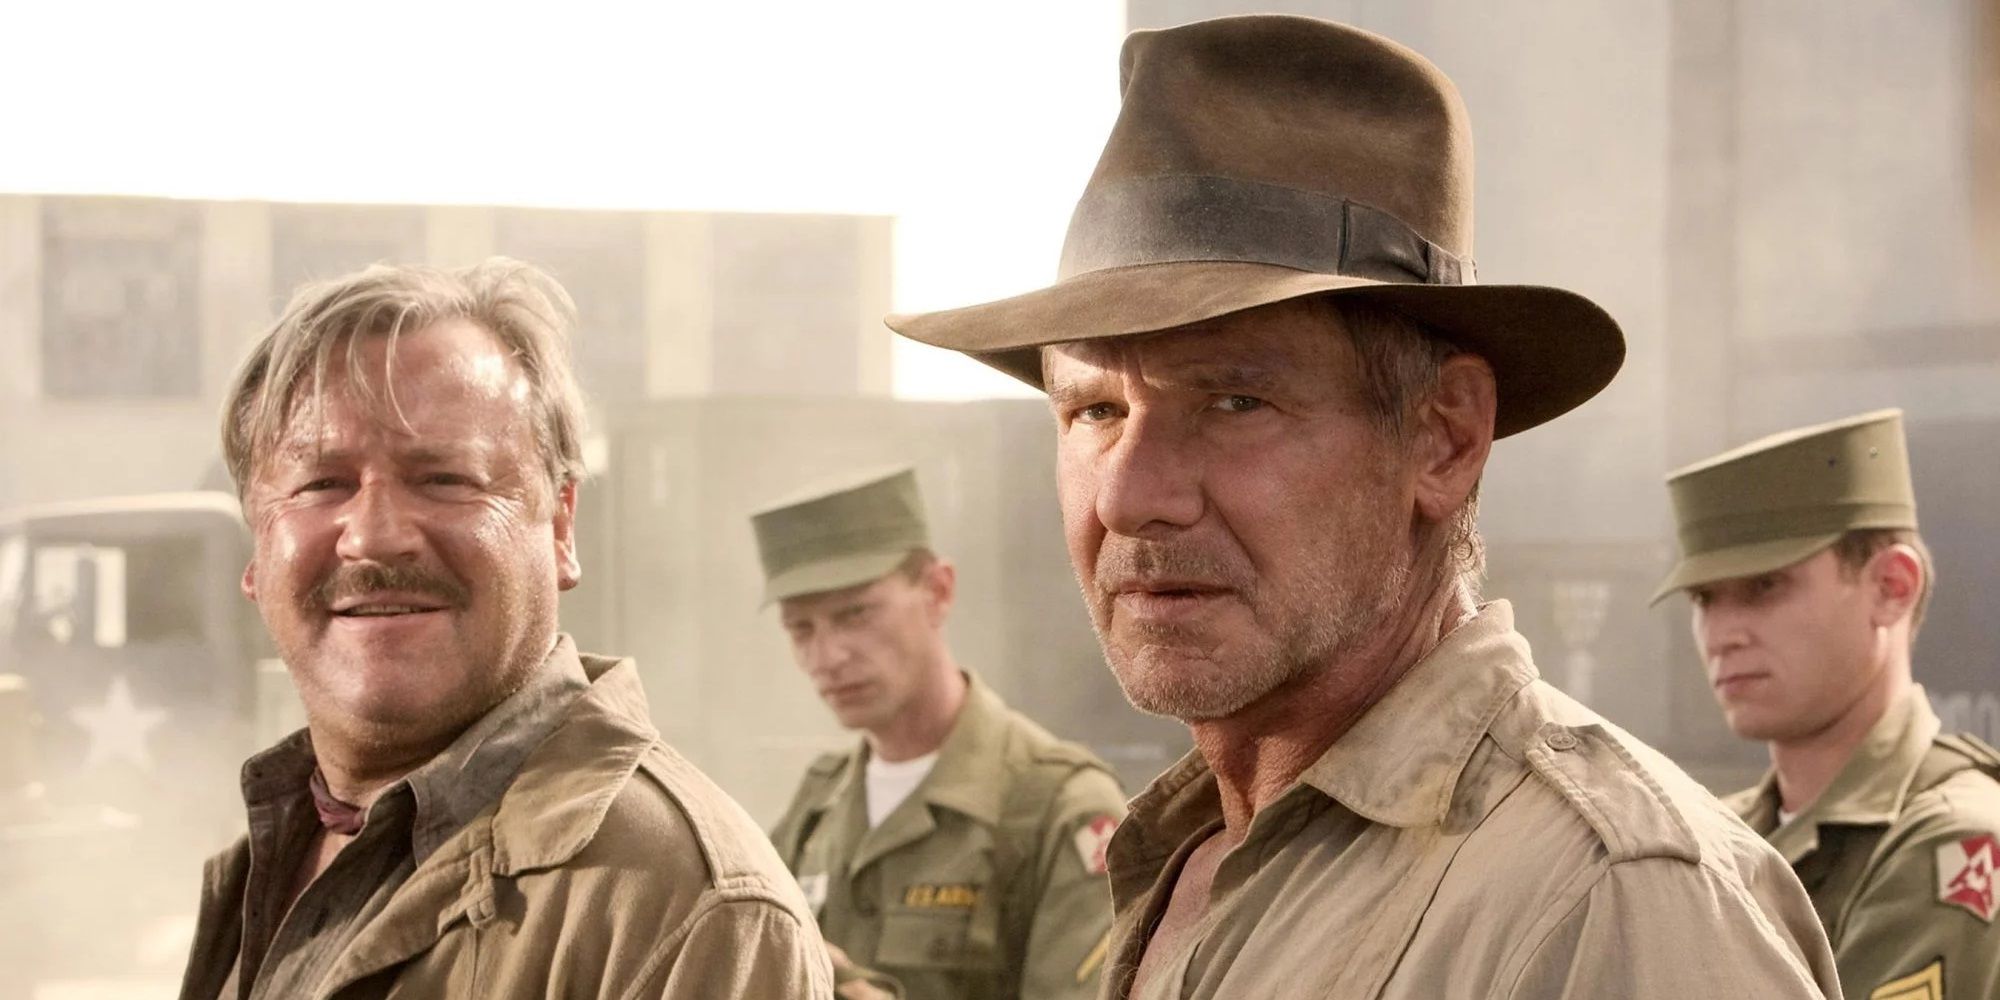 Indy and George are captured by the Soviets in Indiana Jones and the Kingdom of the Crystal Skull